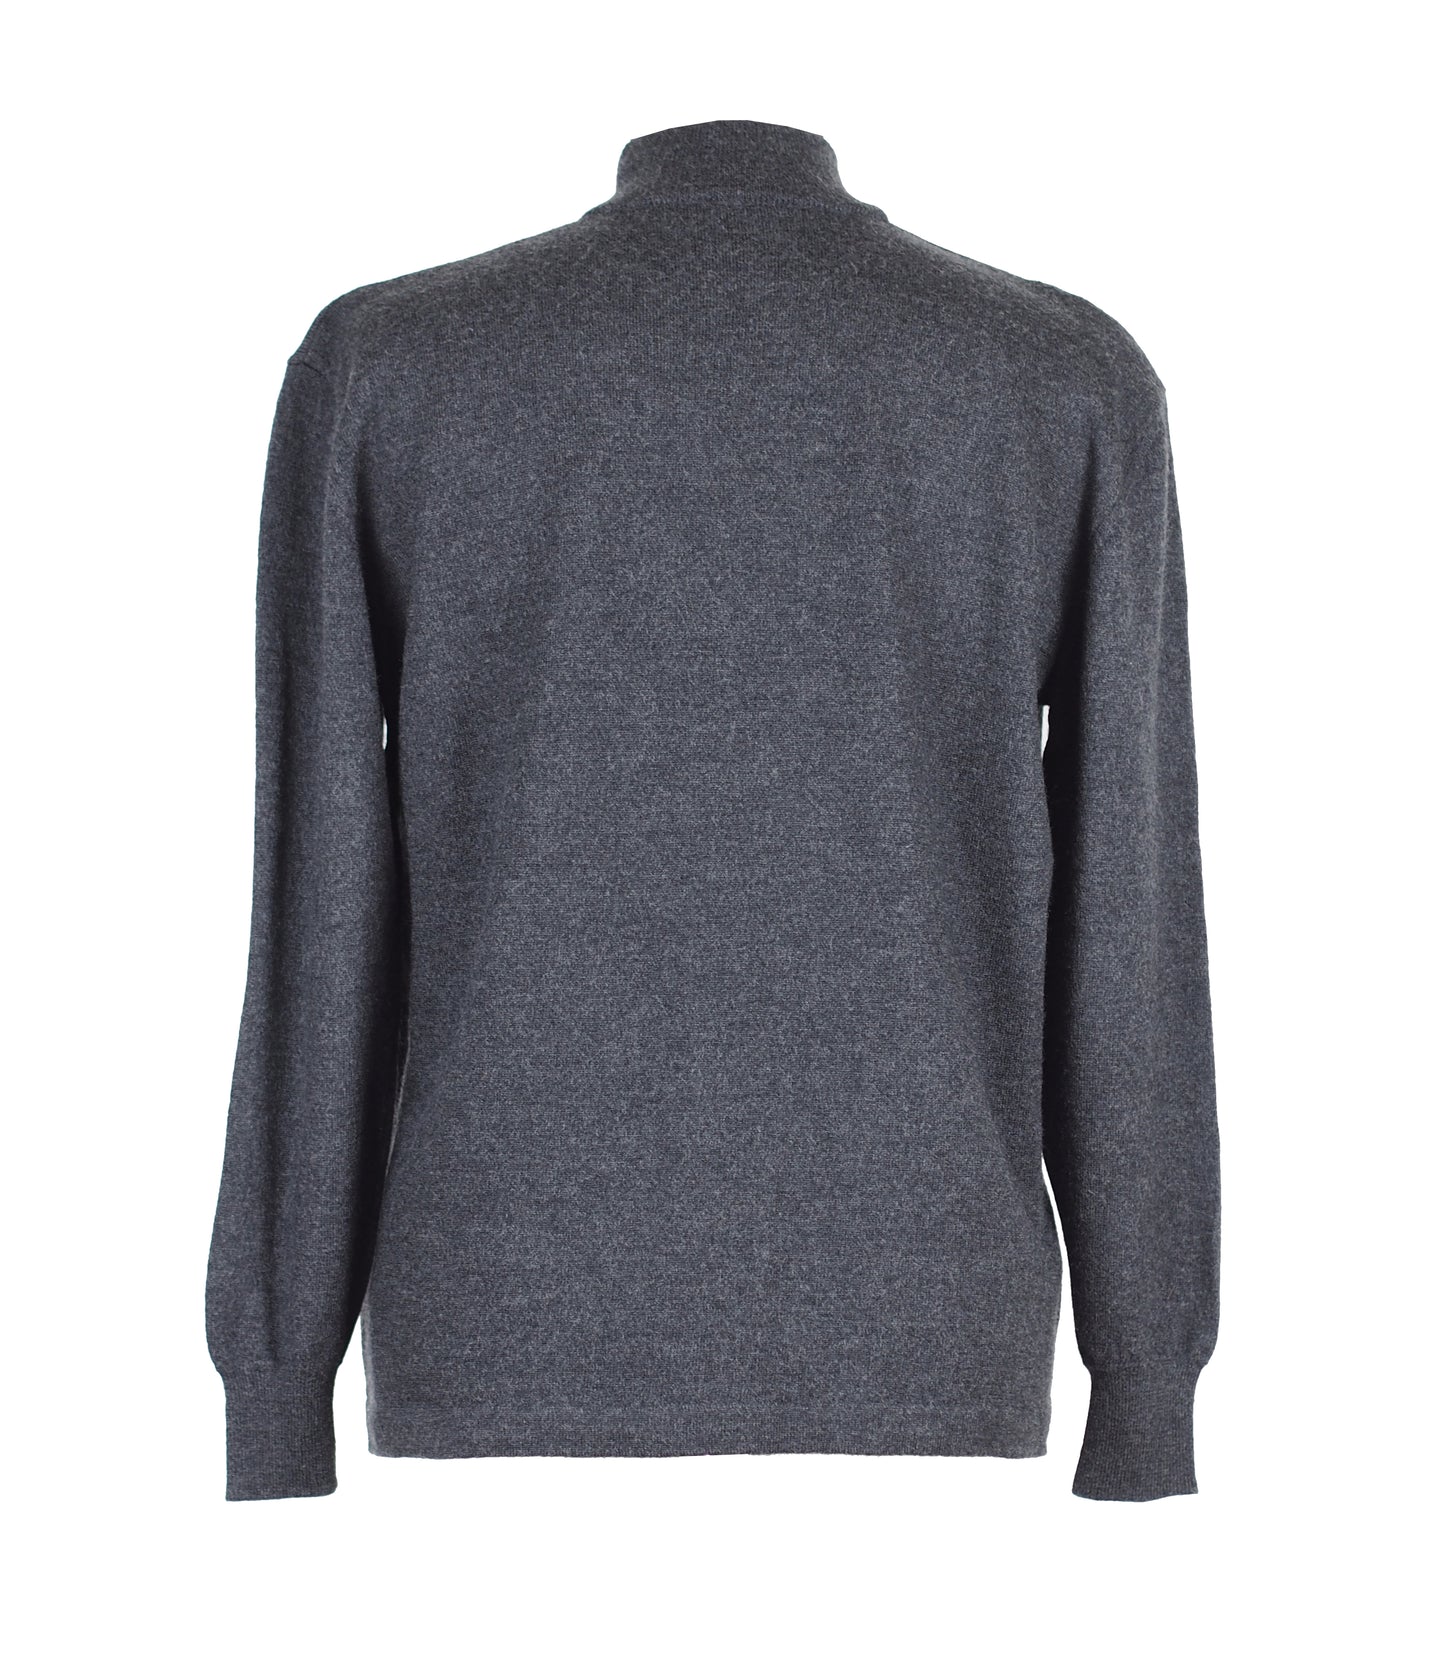 GREY PURE WOOL HIGH NECK SWEATER